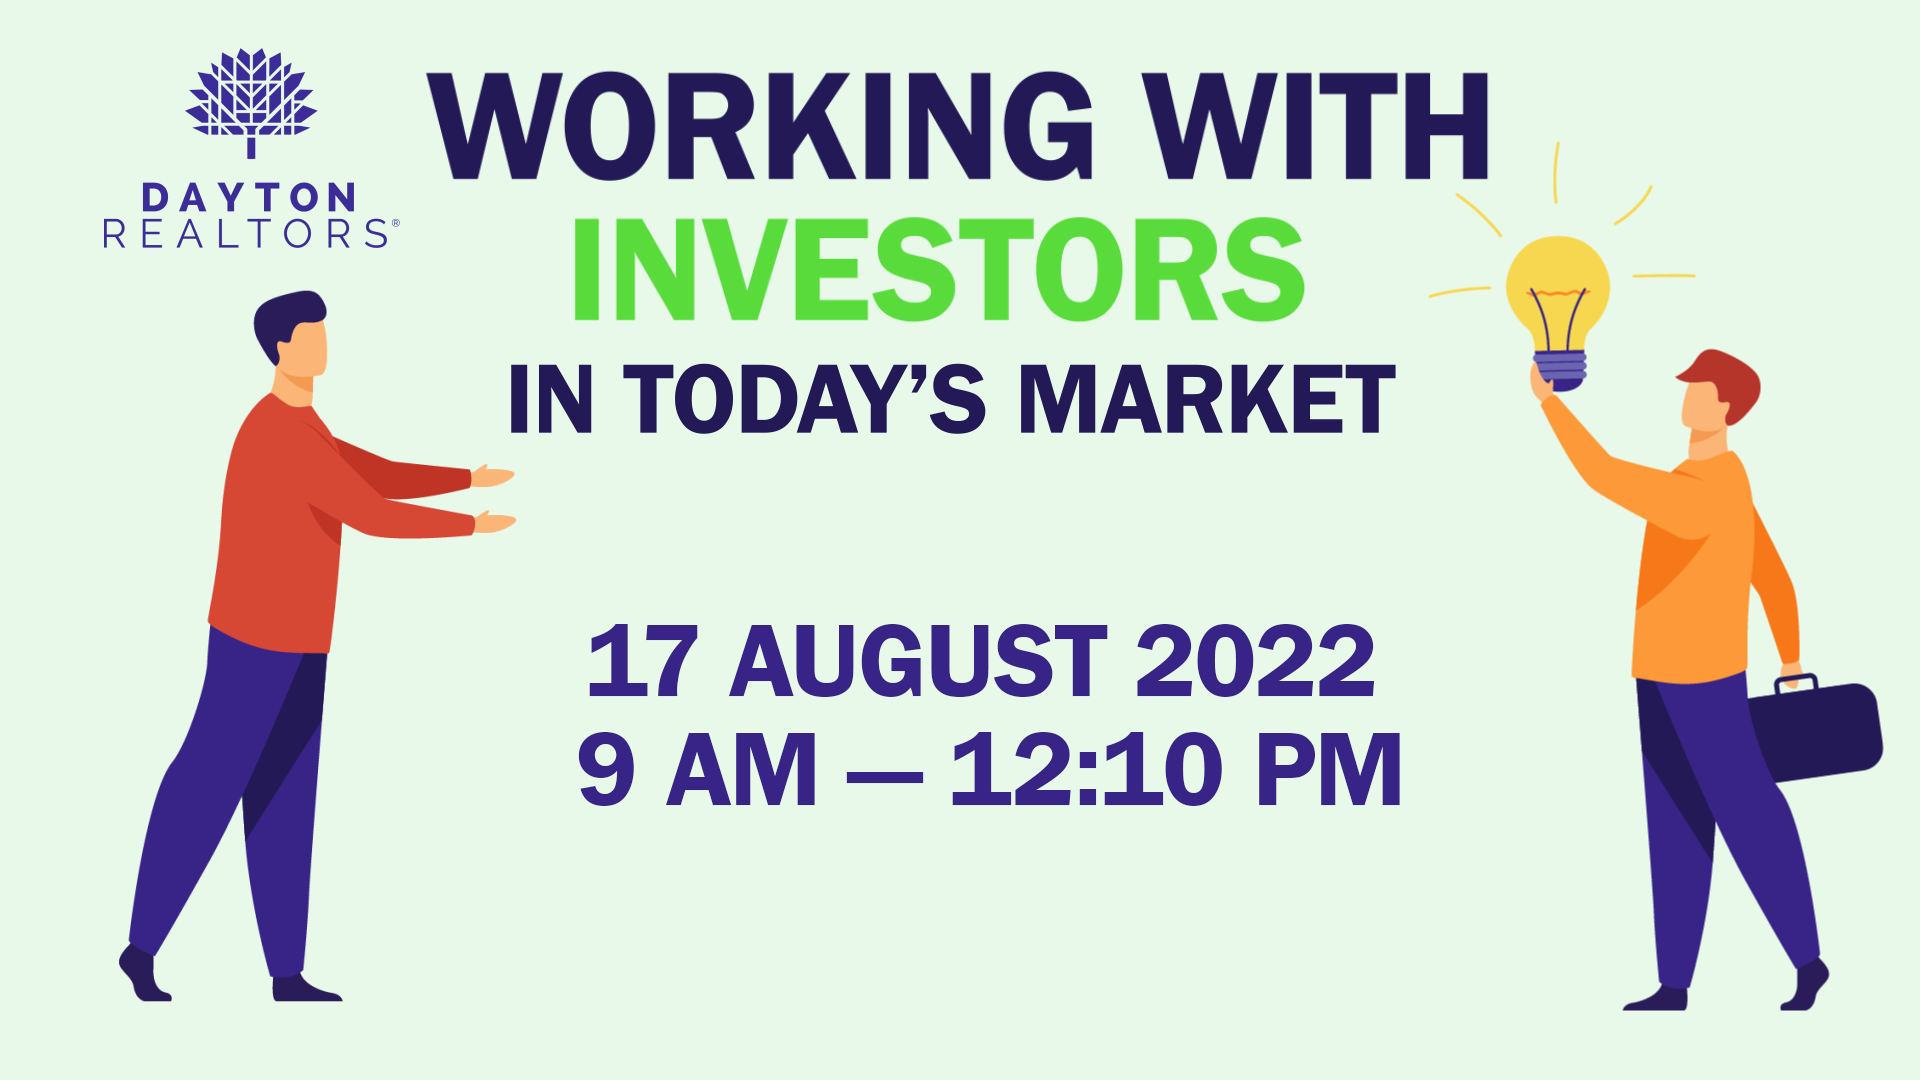 Working with Investors in Today's Market, Aug. 17